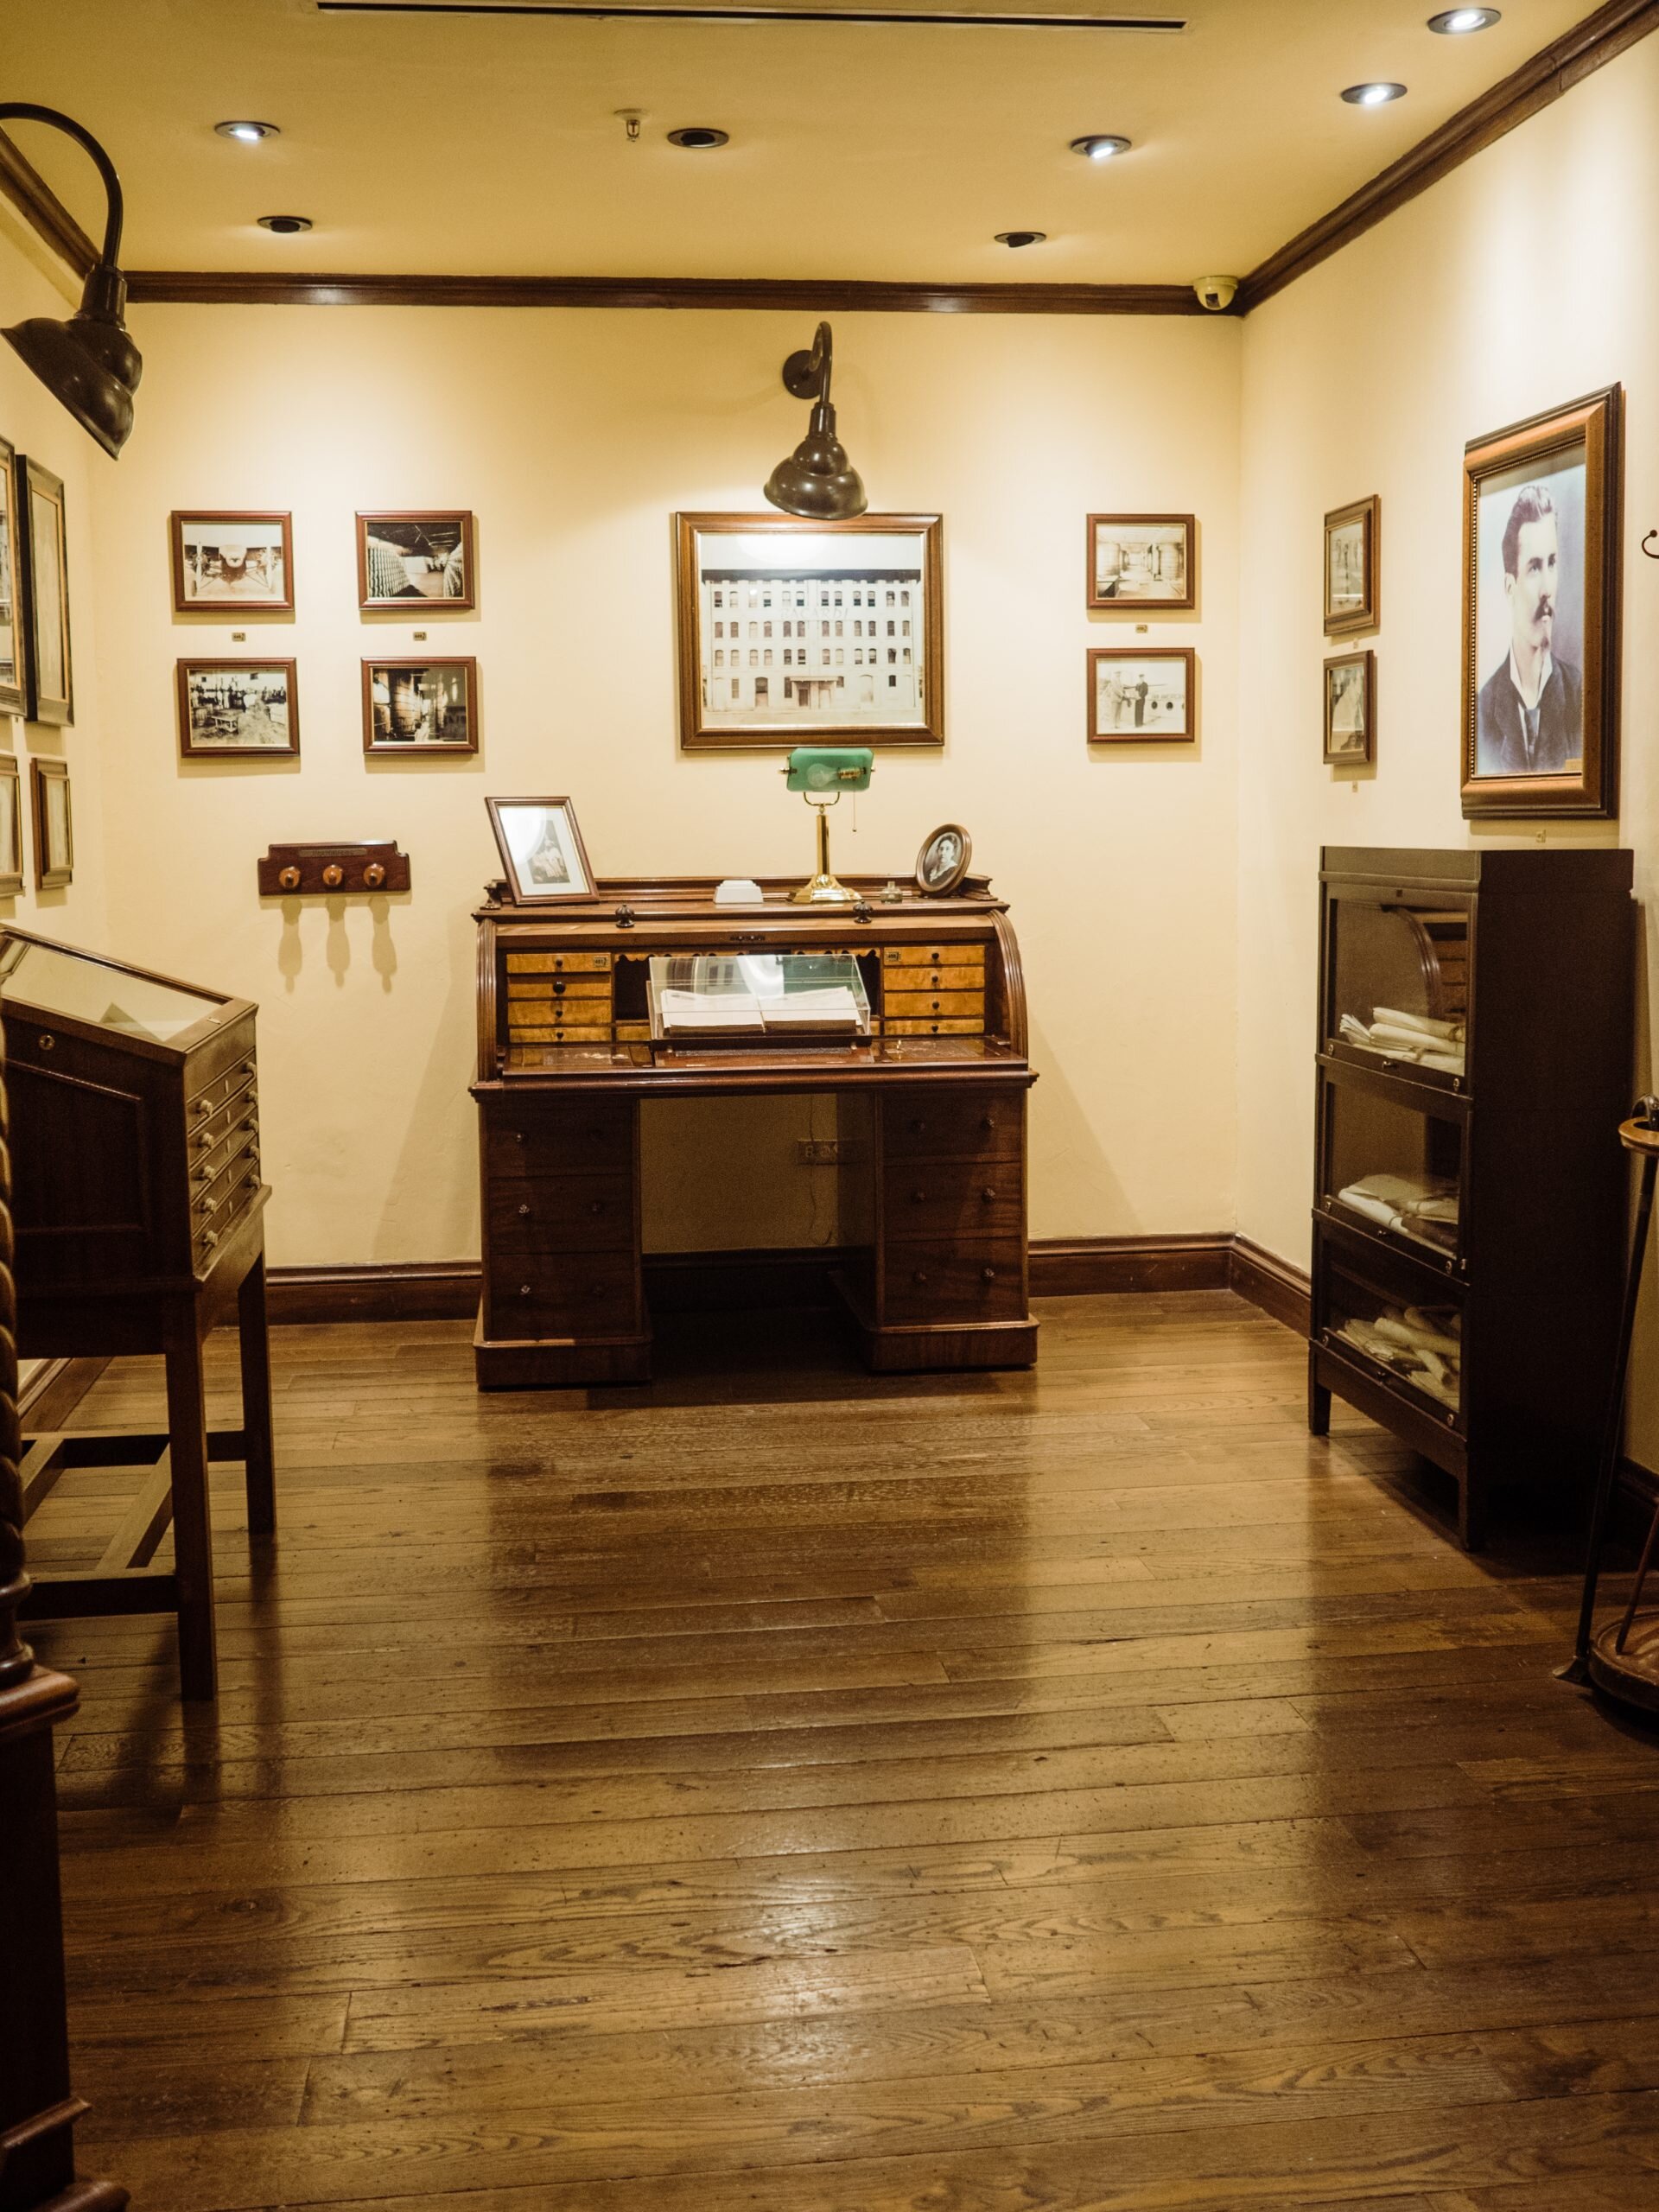 inside rum museum with 19th century artifacts